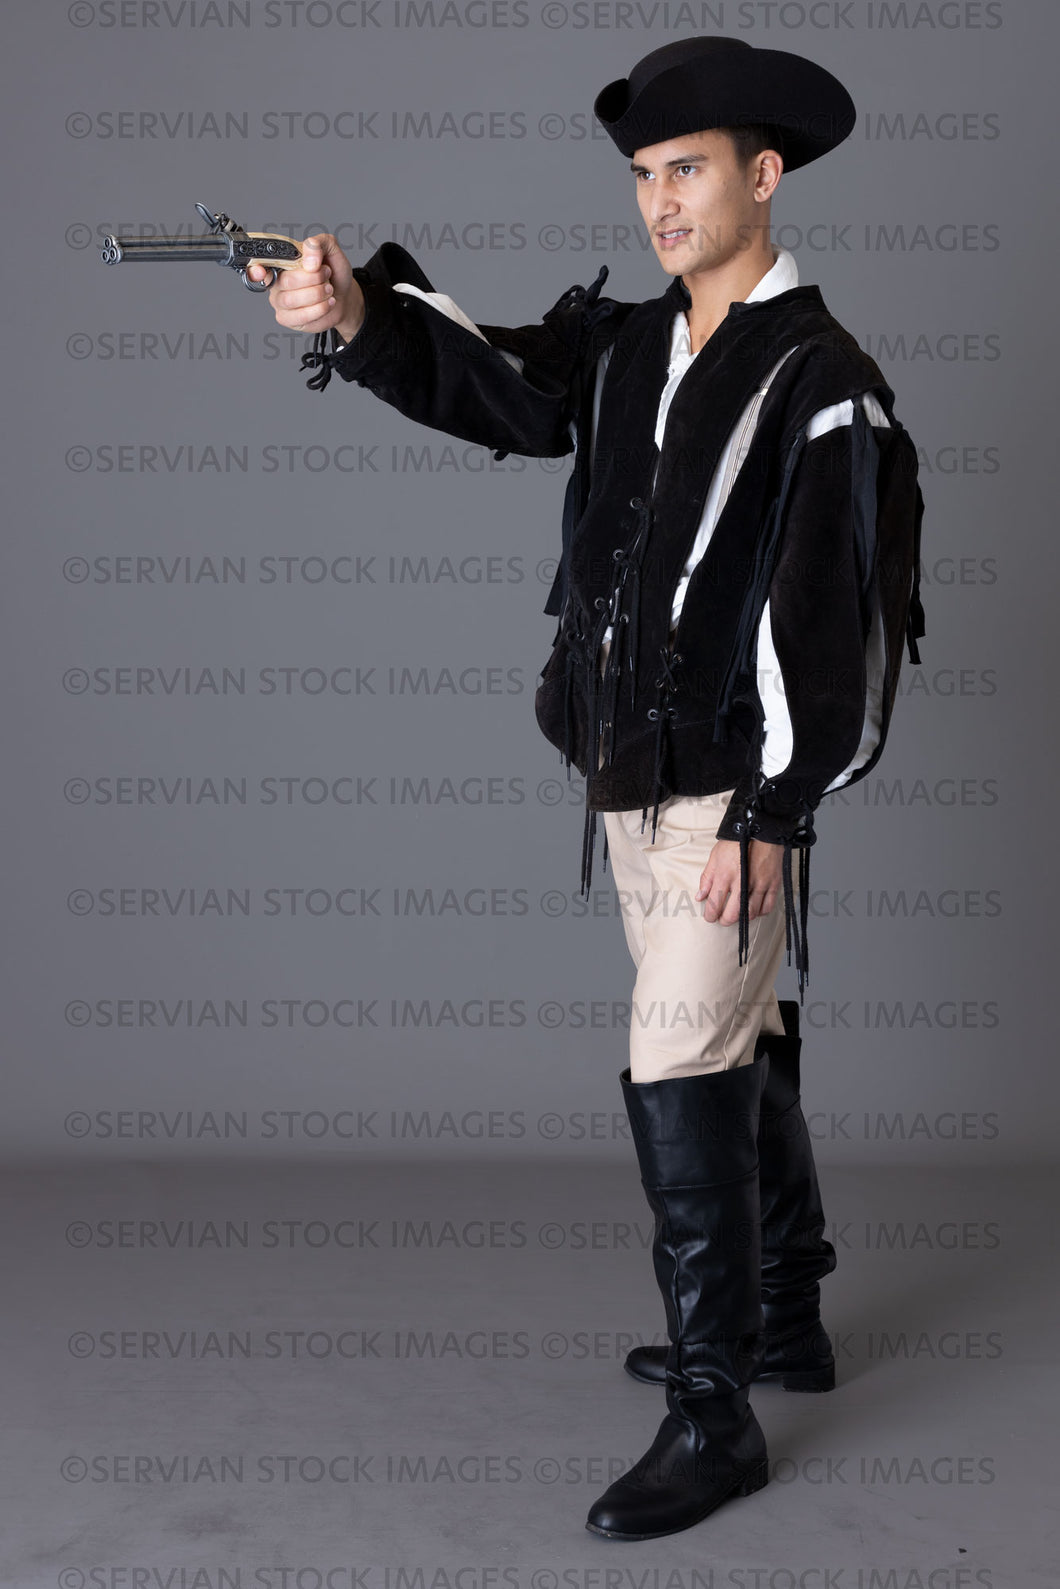 Pirate man holding a pistol against a grey backdrop (Lukas 5965)